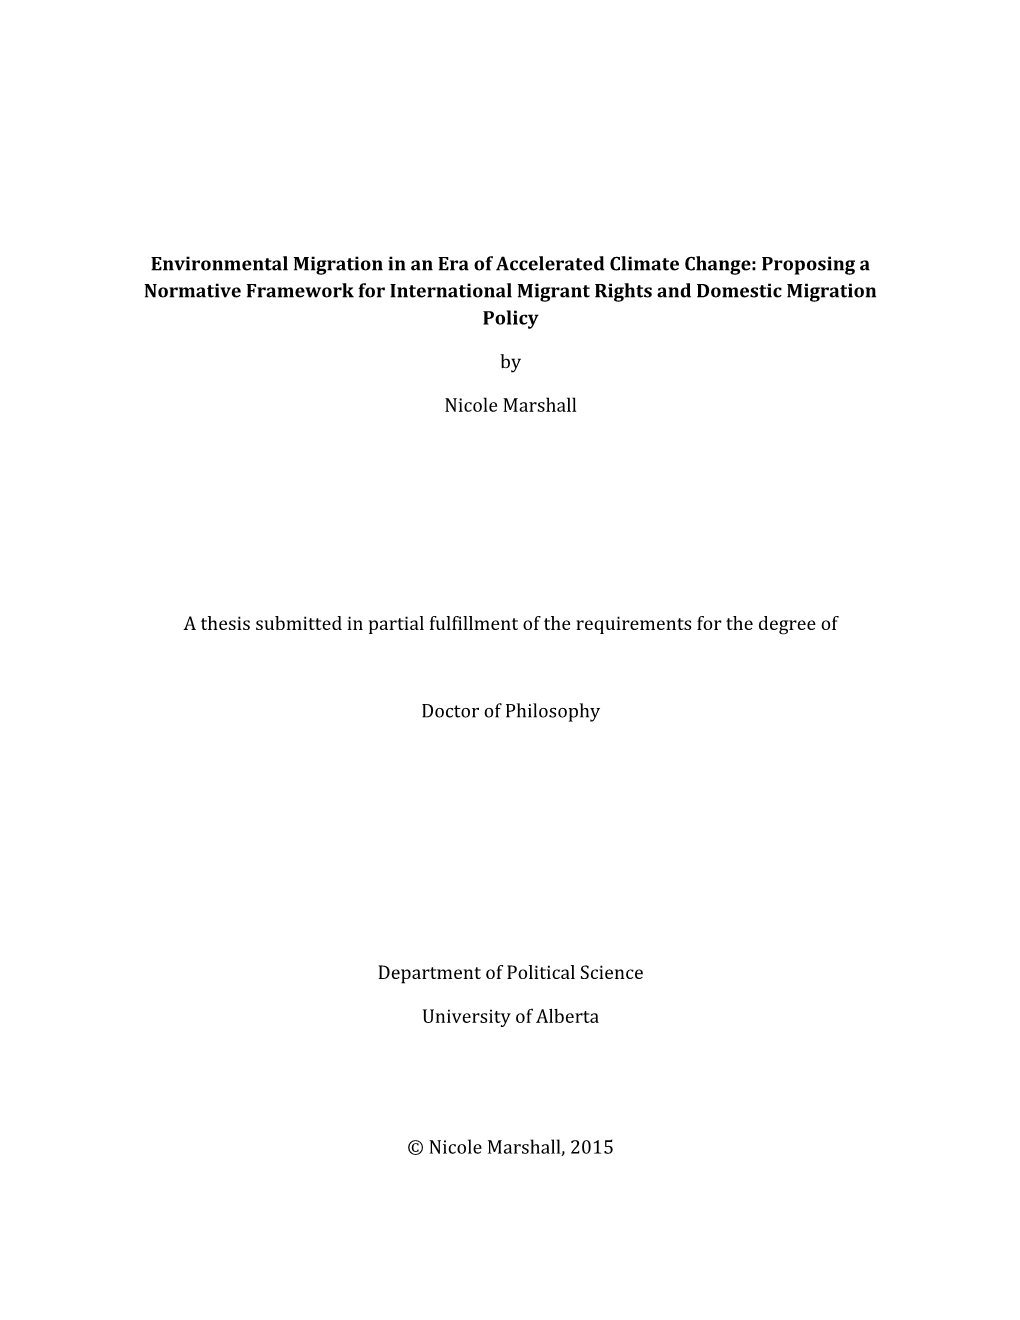 Environmental Migration in an Era of Accelerated Climate Change: Proposing a Normative Framework for International Migrant Rights and Domestic Migration Policy